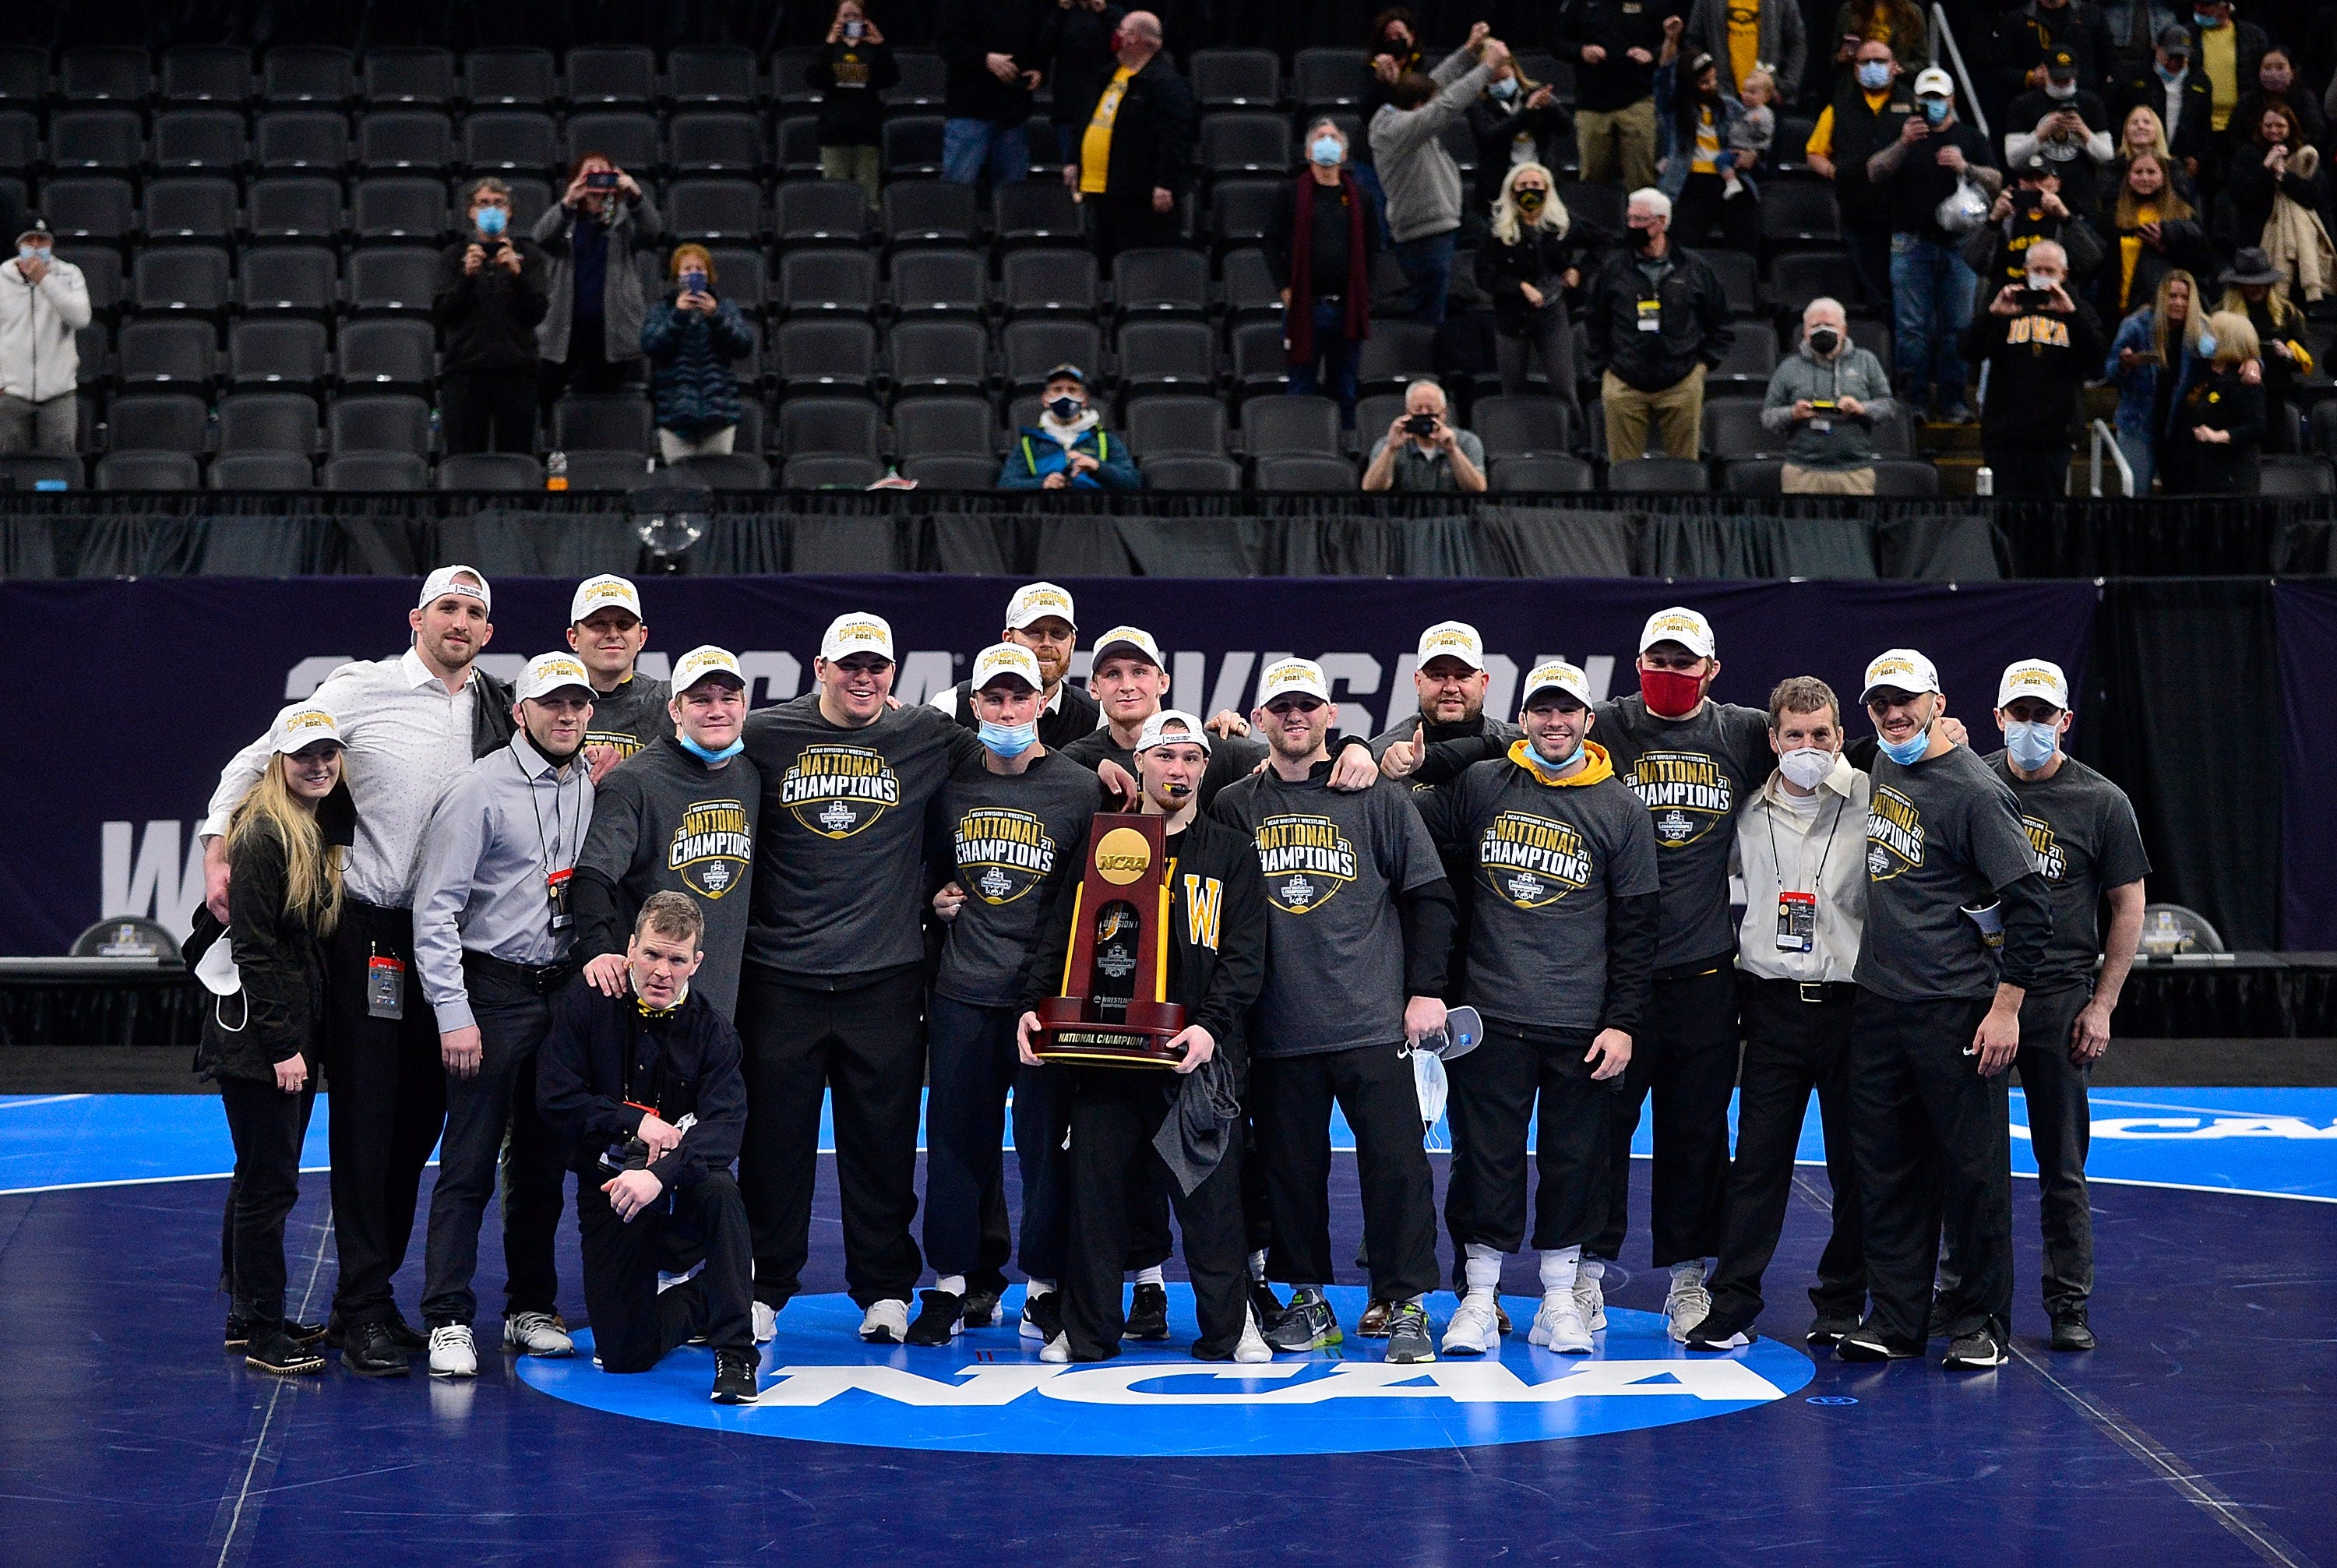 How to watch and follow the 2022 NCAA Wrestling Championships